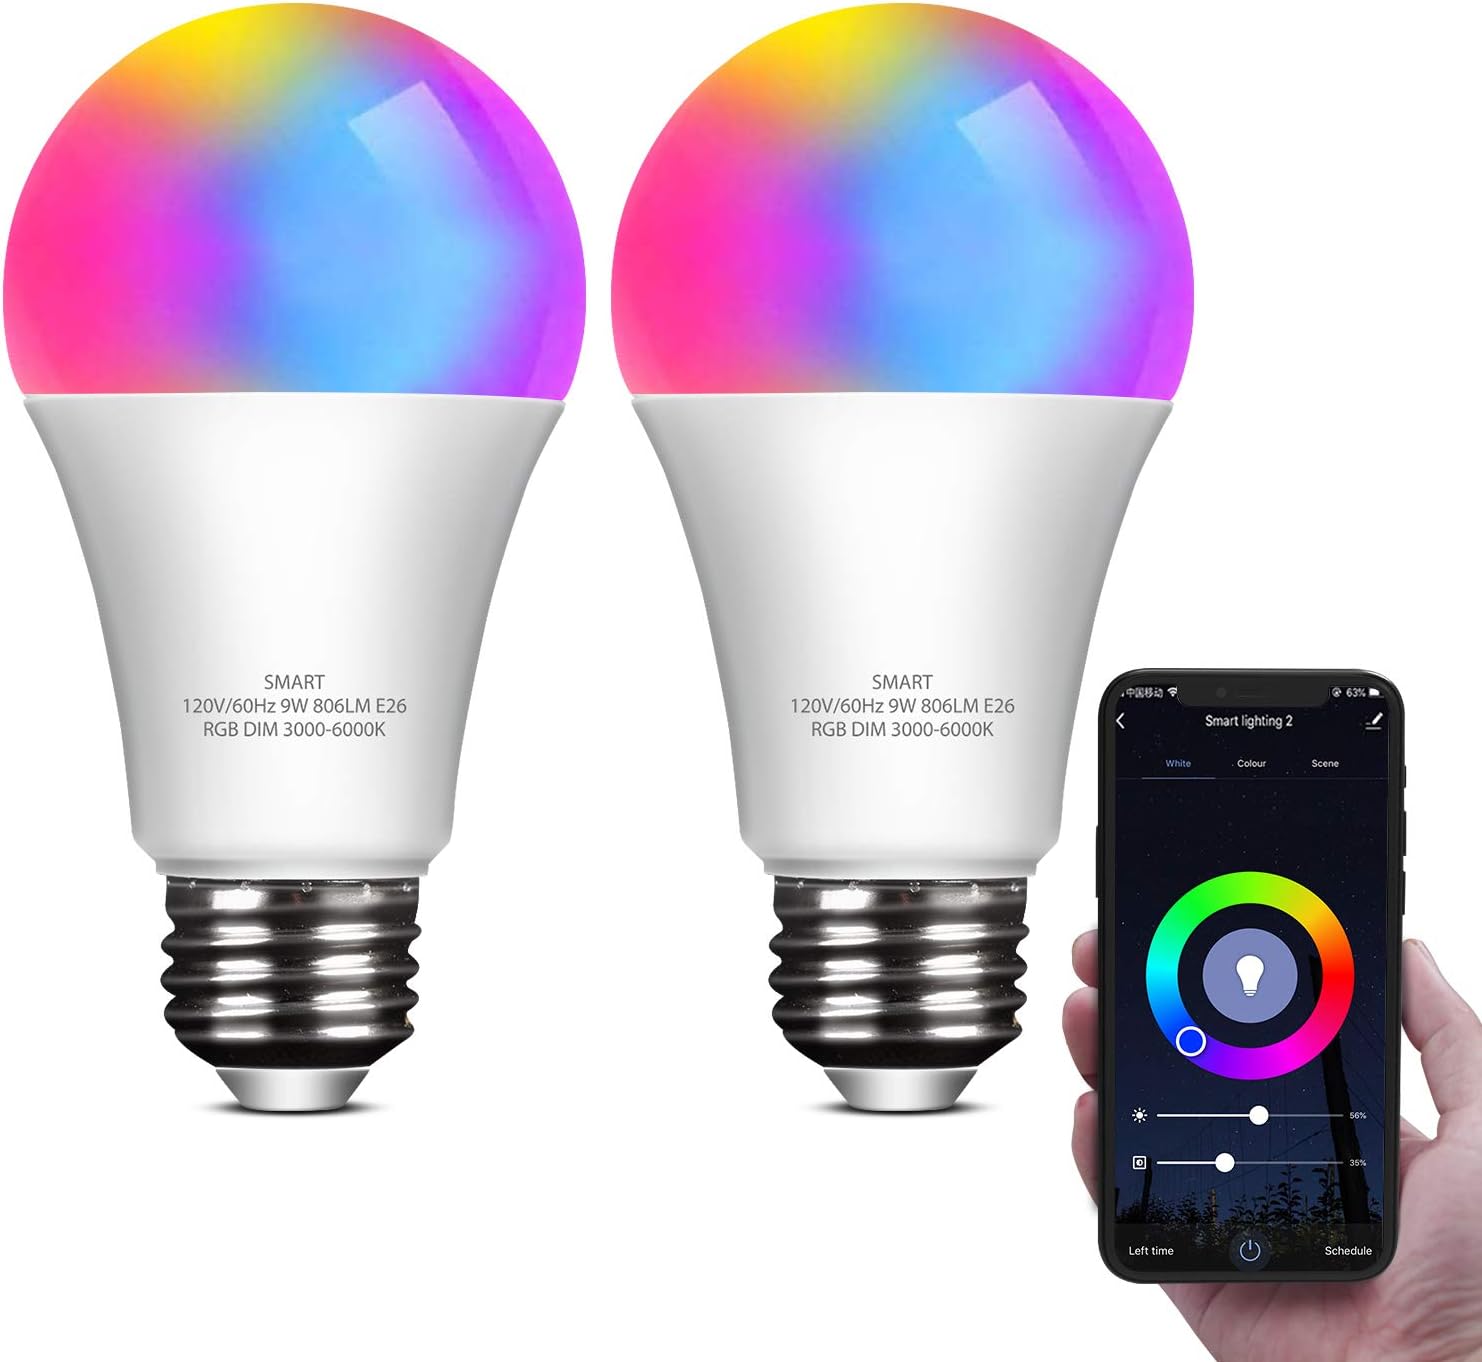 melodisk Billy ged symmetri Elecwish Smart LED Light Bulb Work with Alexa and Google Home A19 E26 9W  806lm Multicolor 2.4 GHz WiFi Dimmable Lights Bulbs